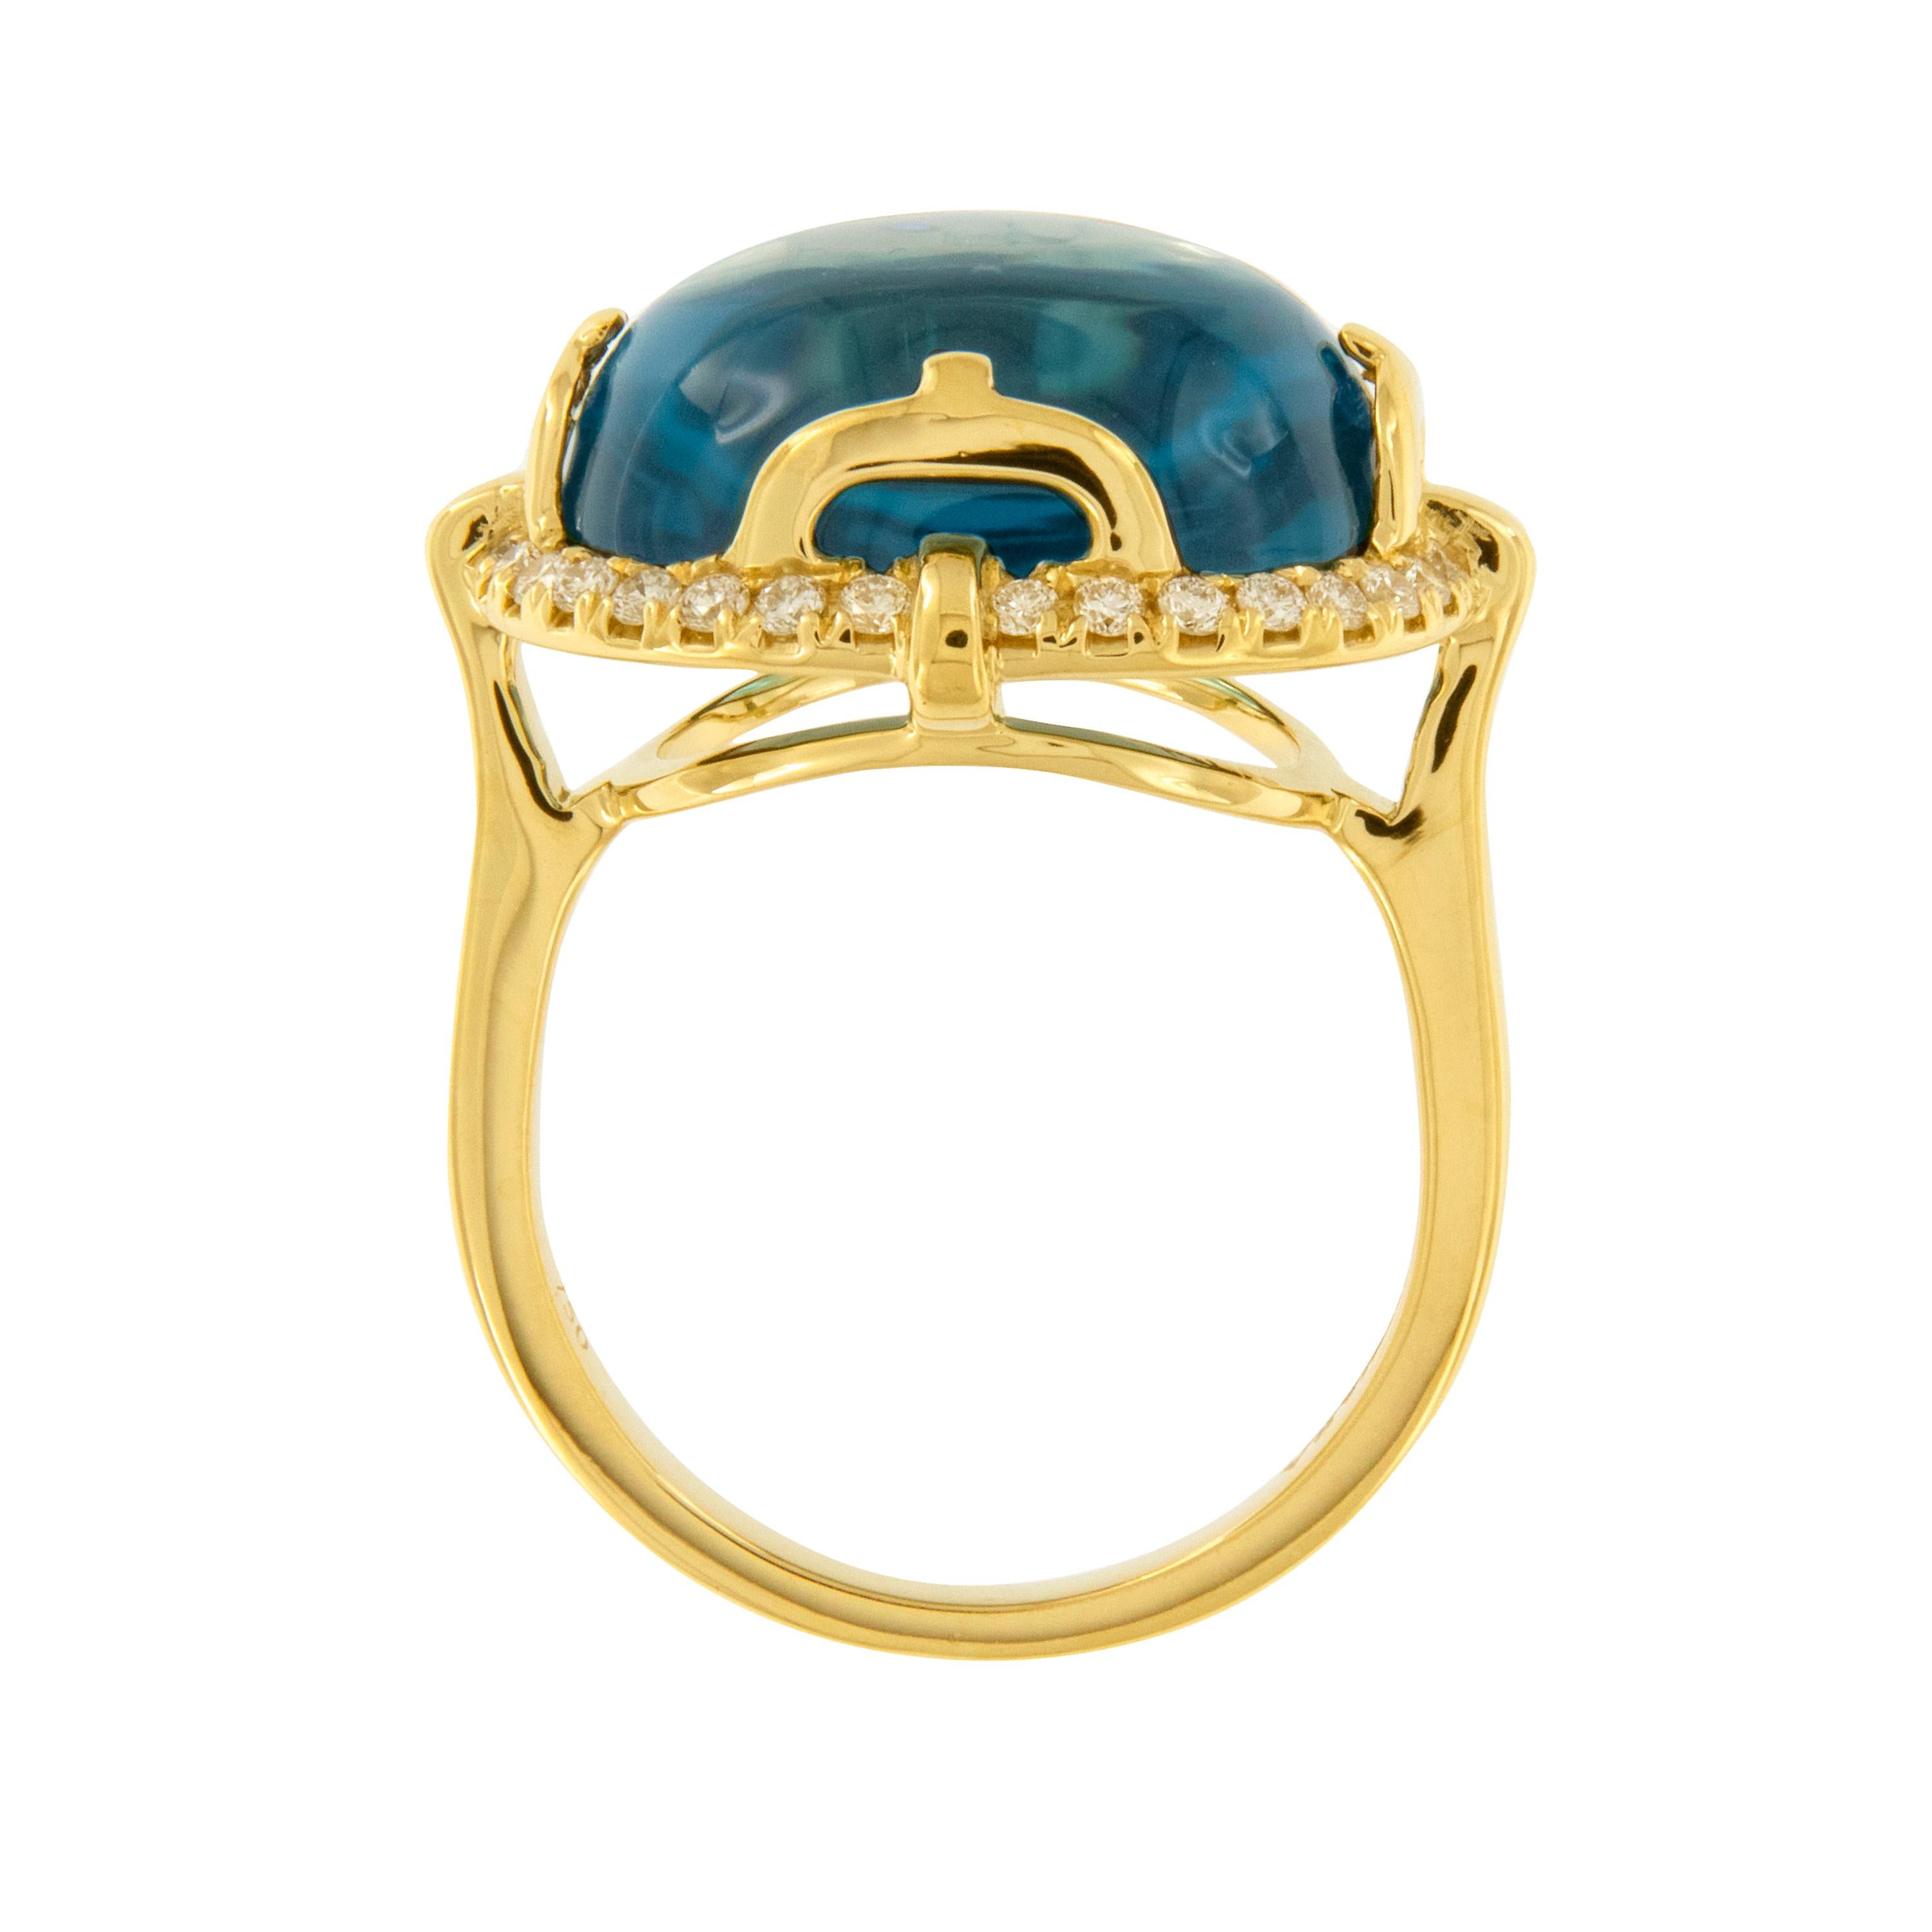 Be the Rock Star that you are wearing this ring! Like the music, the Rock ‘n Roll collection is electric in color with silhouettes that may bring out the rock star in you! Expertly crafted in 18 karat yellow gold with 0.34 Cttw diamonds that set the